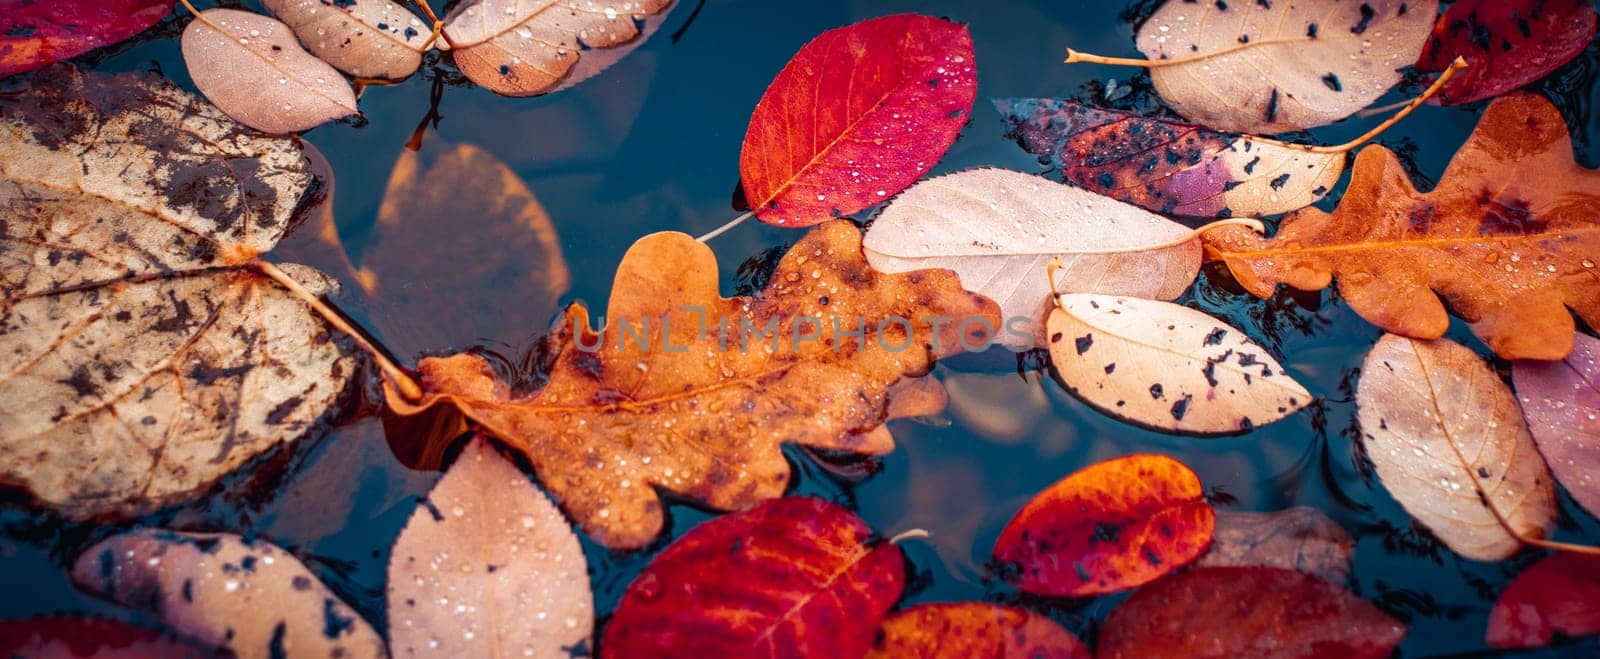 Close up view of a garden pond with autumn leaves concept photo. Colorful leaves under rain. by _Nataly_Nati_